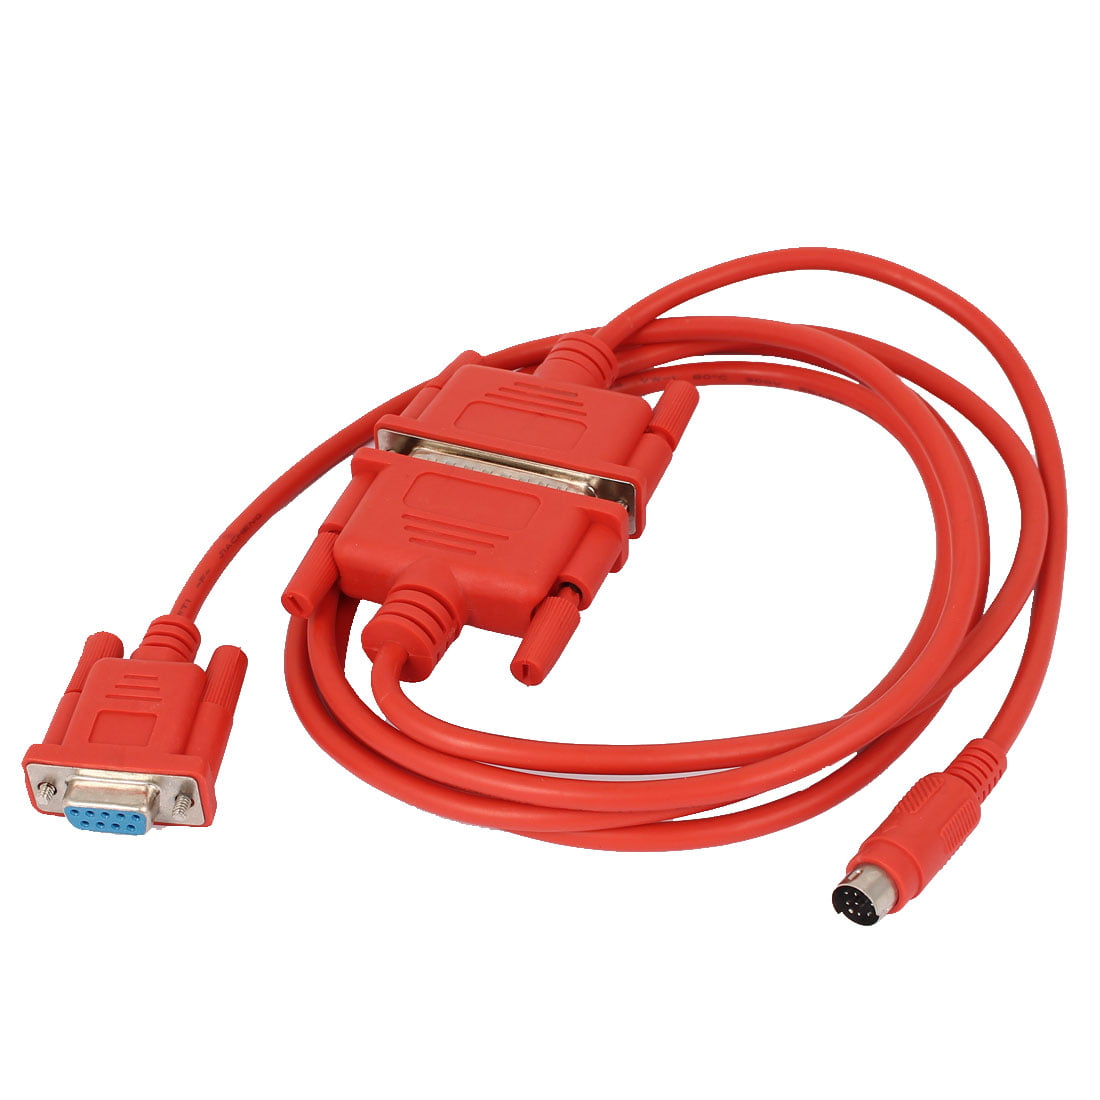 USB-SC09 USB to RS422 Adapter PLC Programming Cable for Mitsubishi Melsec FX&A P 